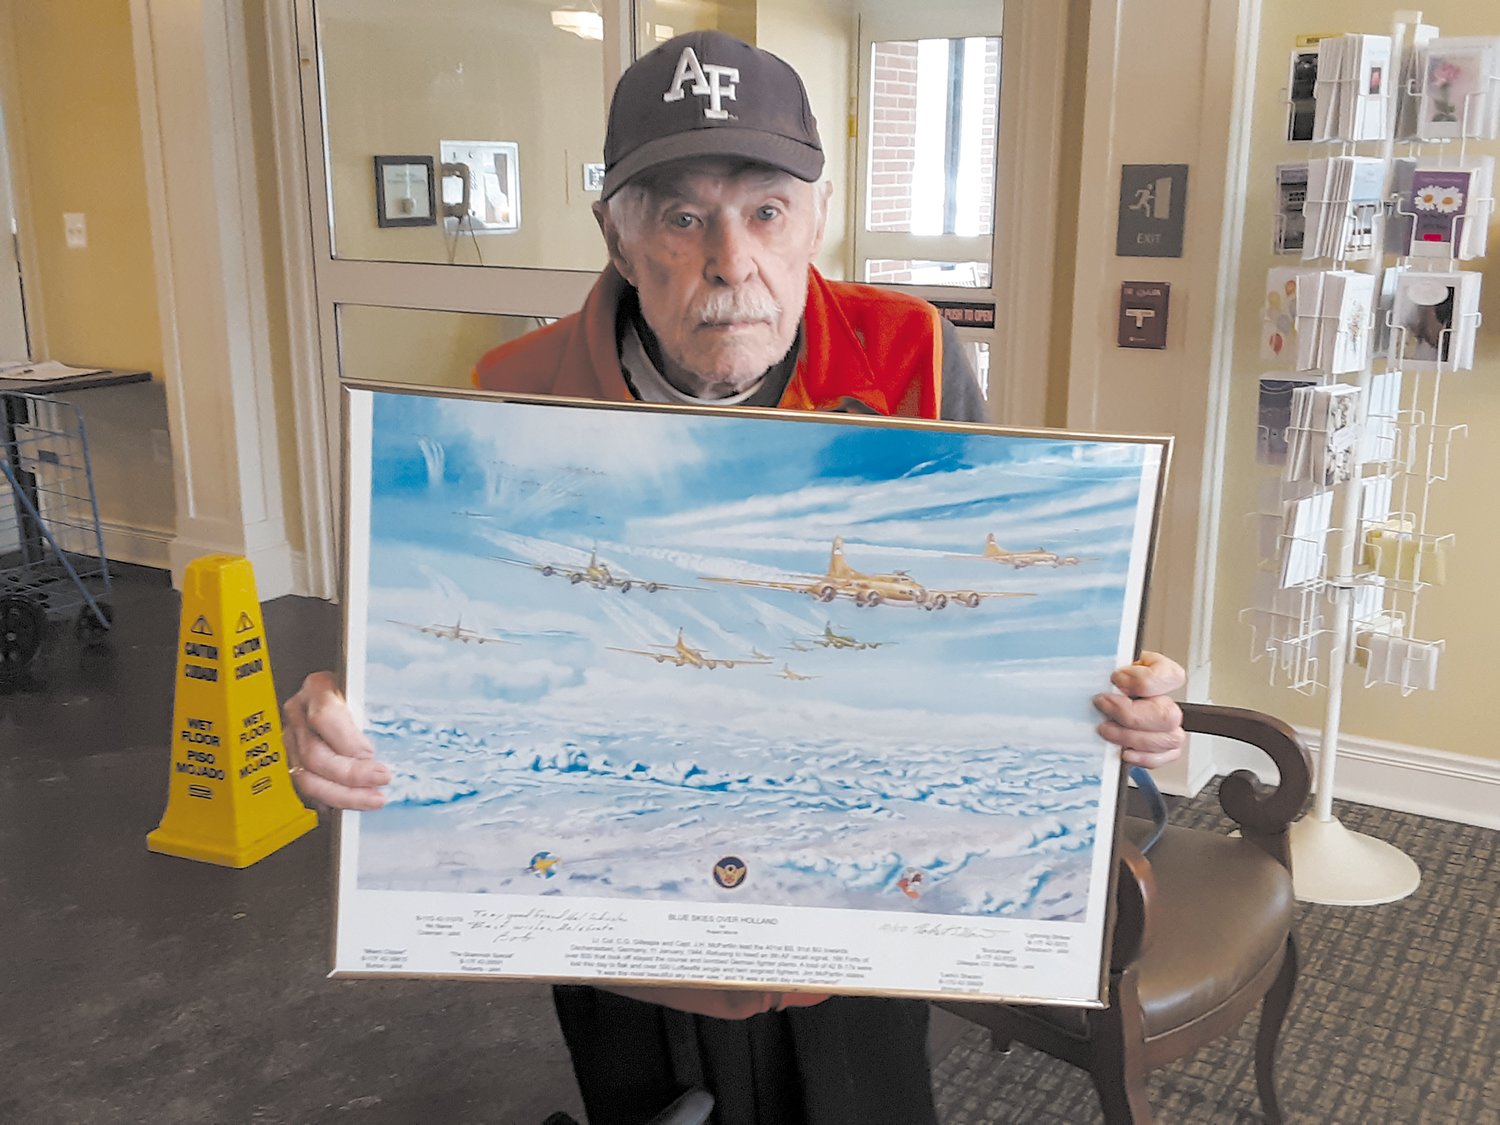 One of World War II veteran Melvin Schissler’s treasured possessions is “Blue Skies over Holland,” a rendering of a 1944 bombing mission to Oschersleben, Germany. It was a gift from Michigan artist Robert Morris.